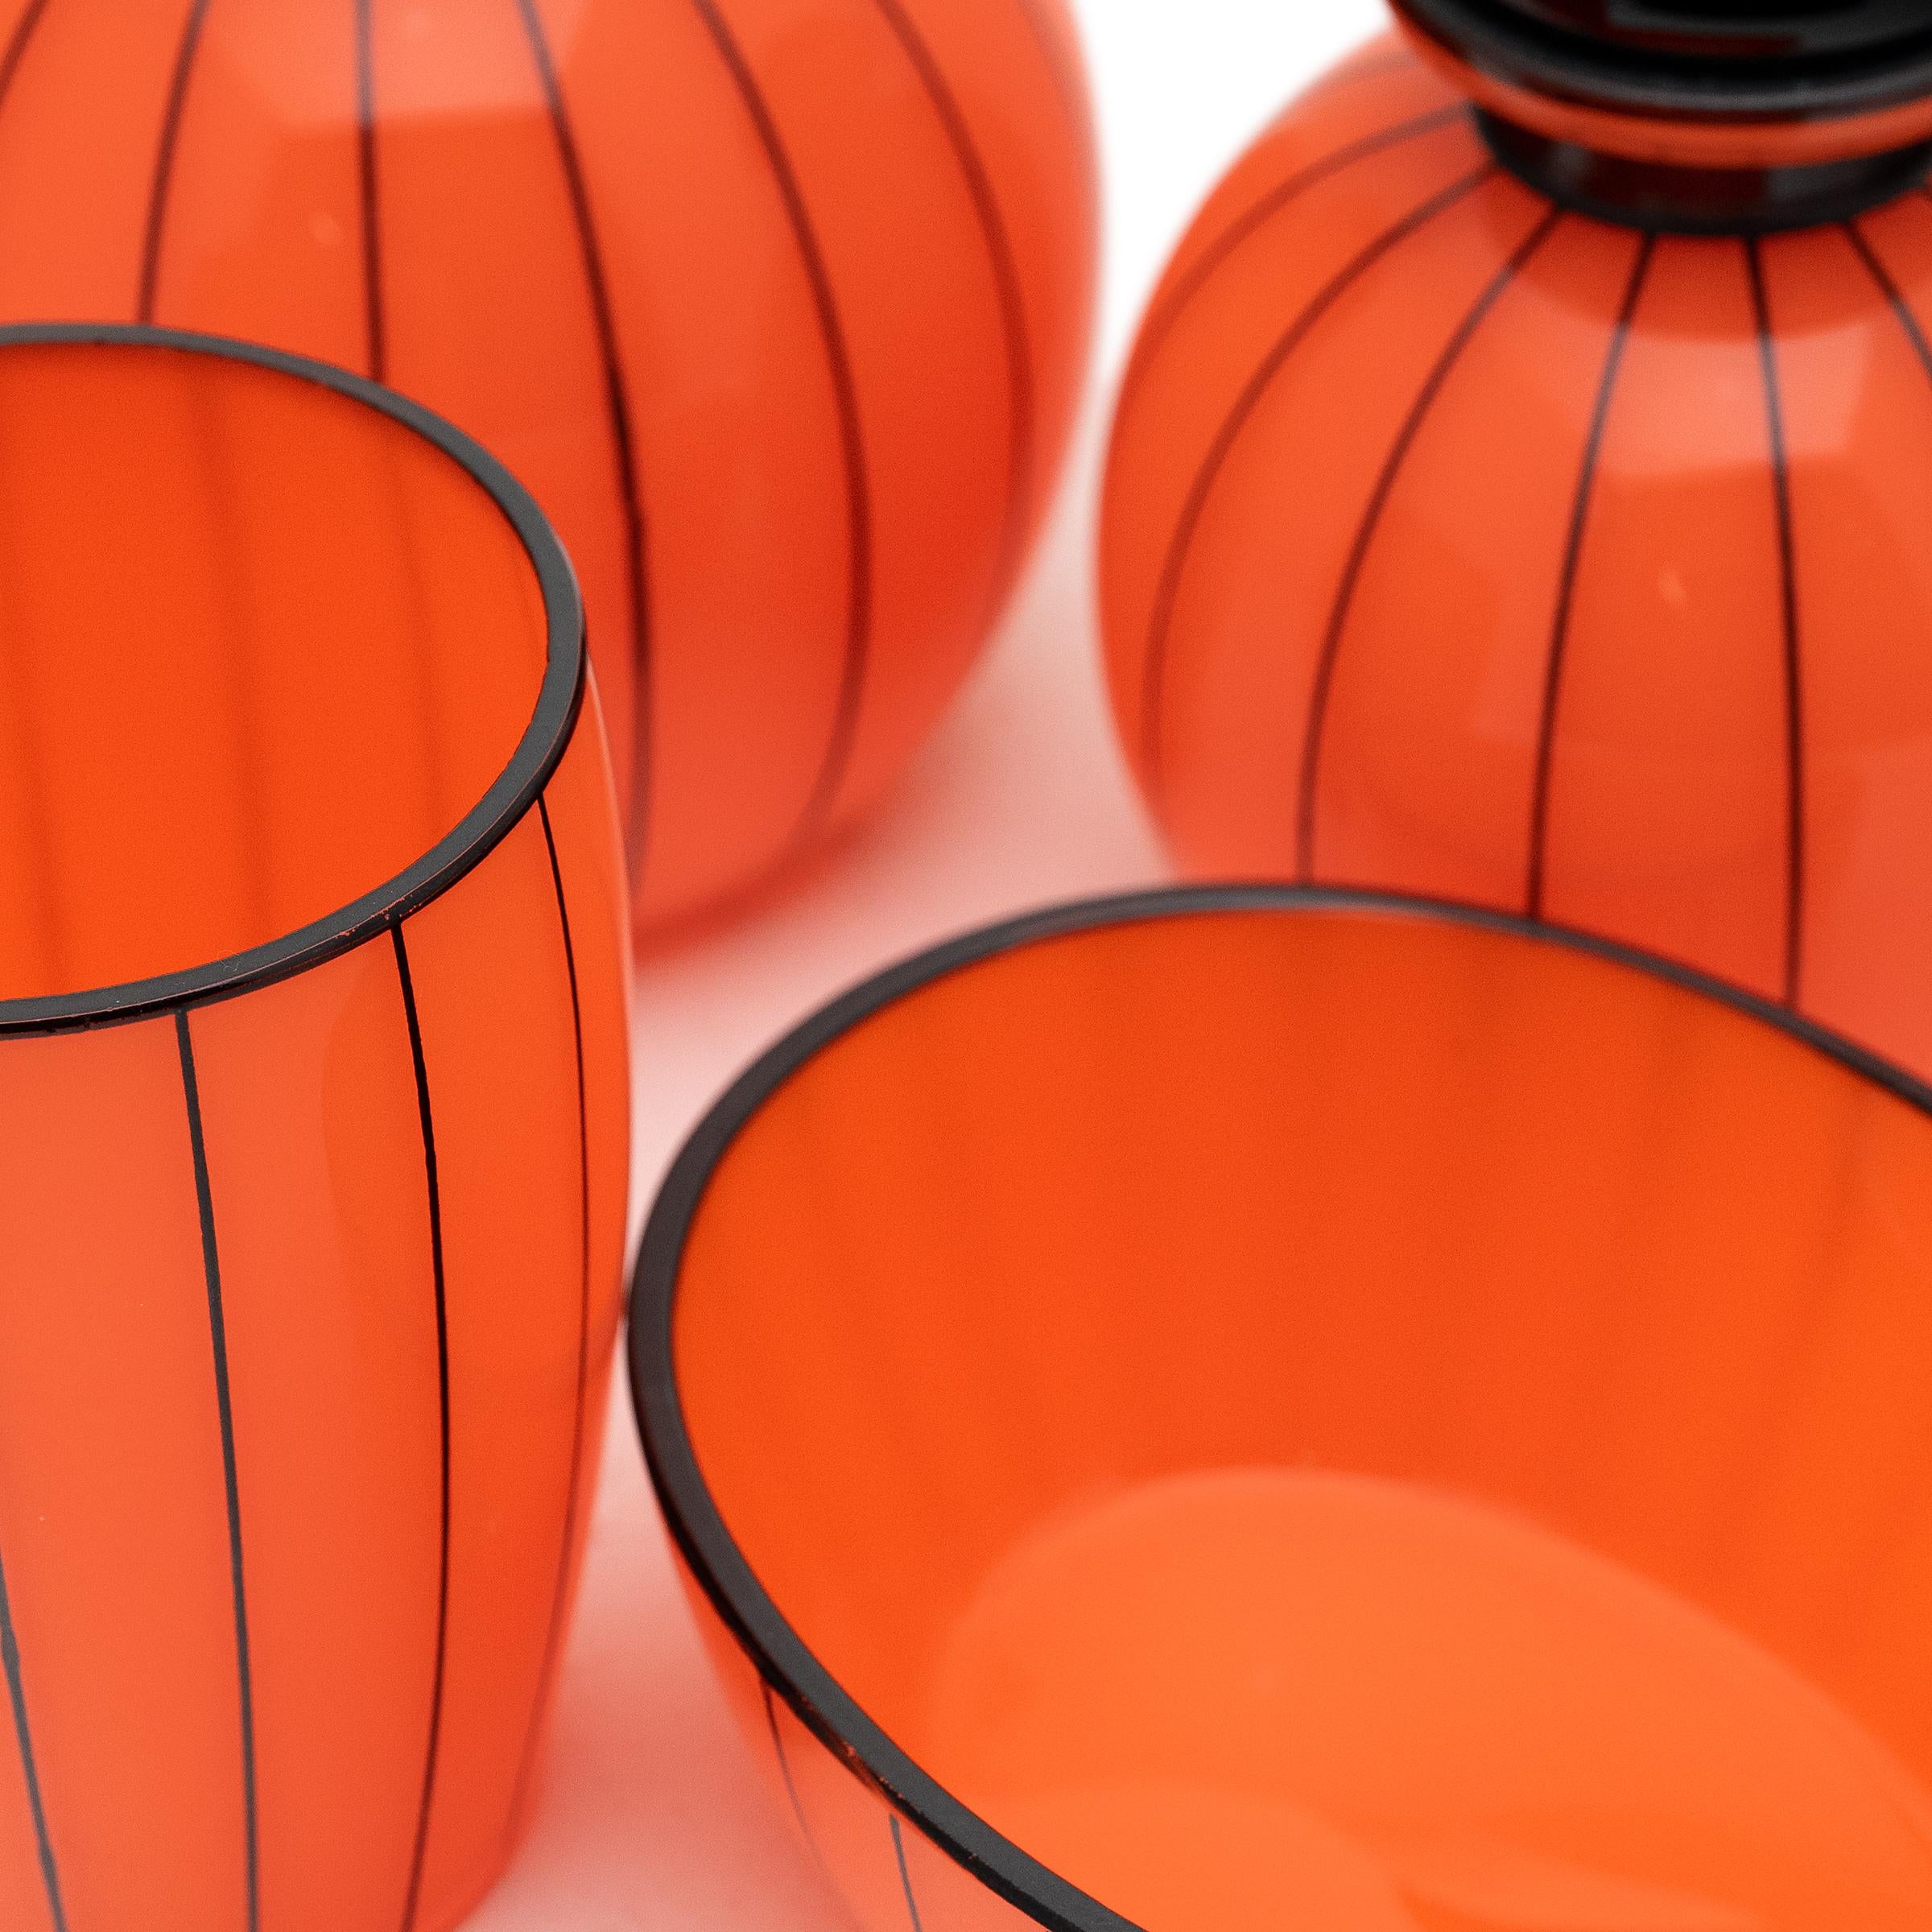 Art Deco Orange Tango Glass Set by Michael Powolny for Loetz, c. 1920 In Good Condition For Sale In Chicago, IL